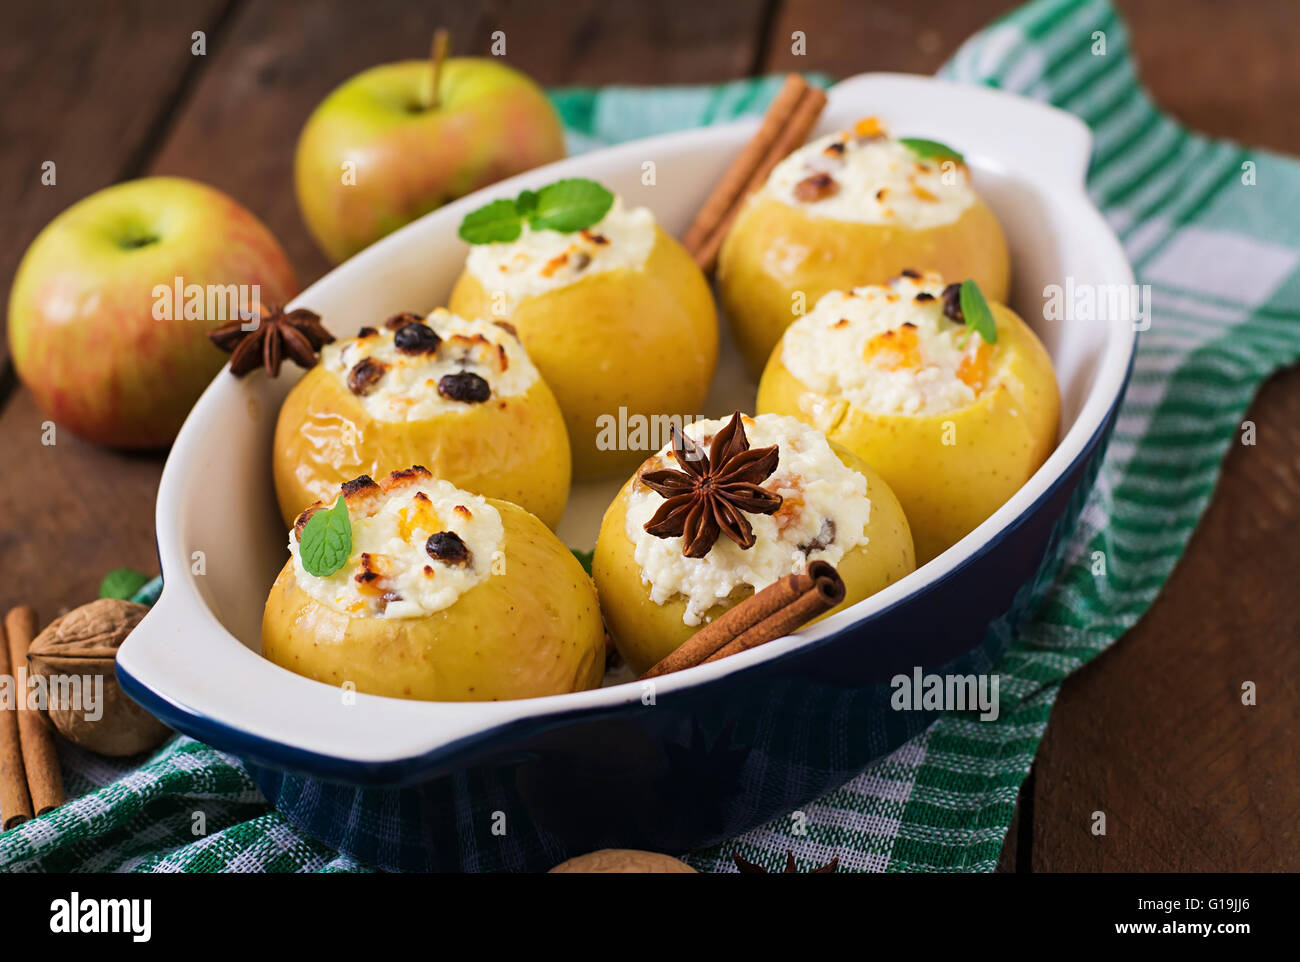 Appetizing Baked Apples With Cottage Cheese And Raisins Stock